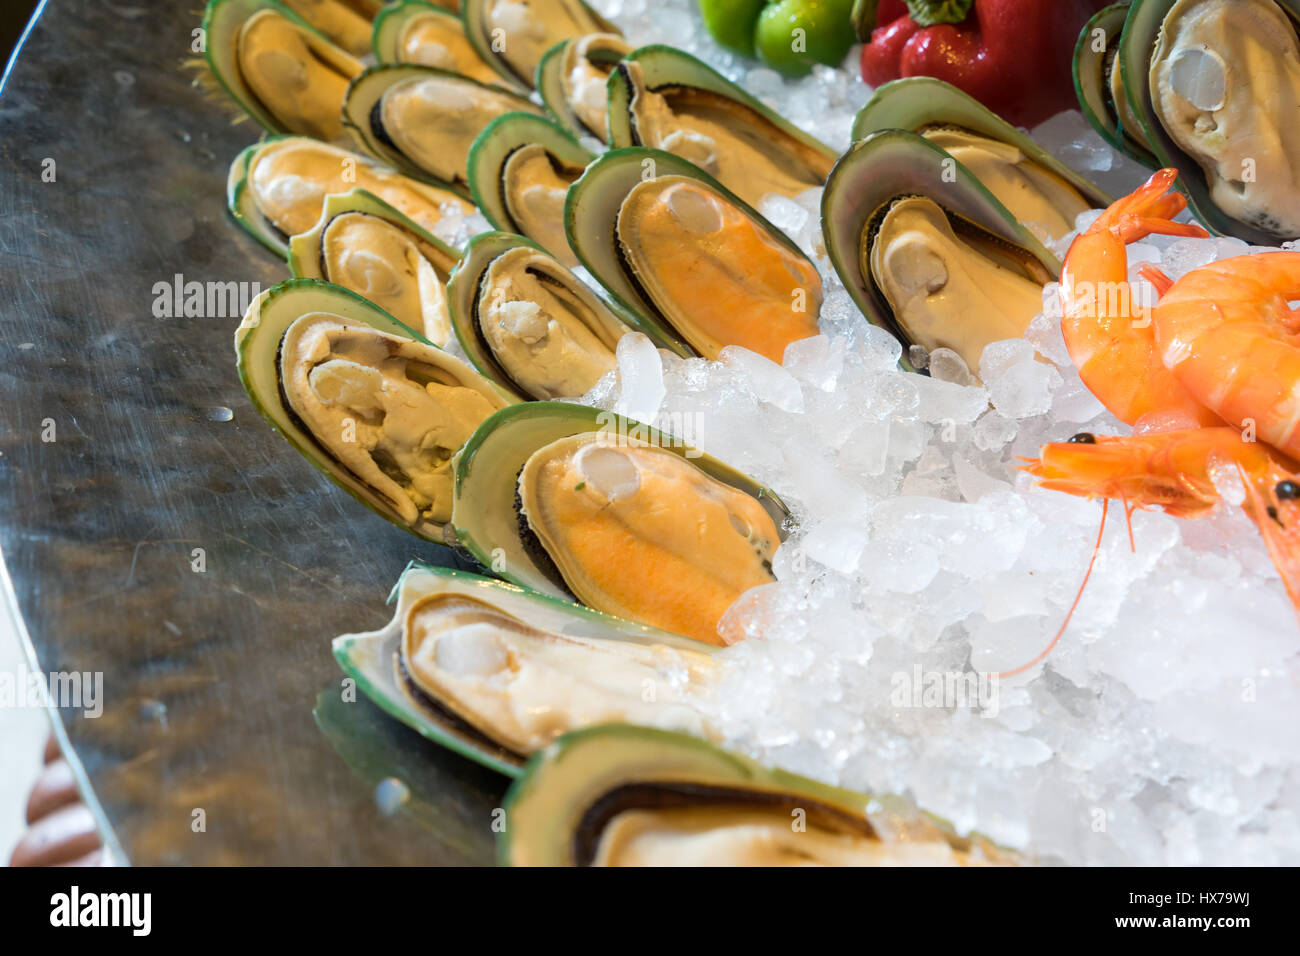 Boiled oyster chilled on ice ready to eat Stock Photo